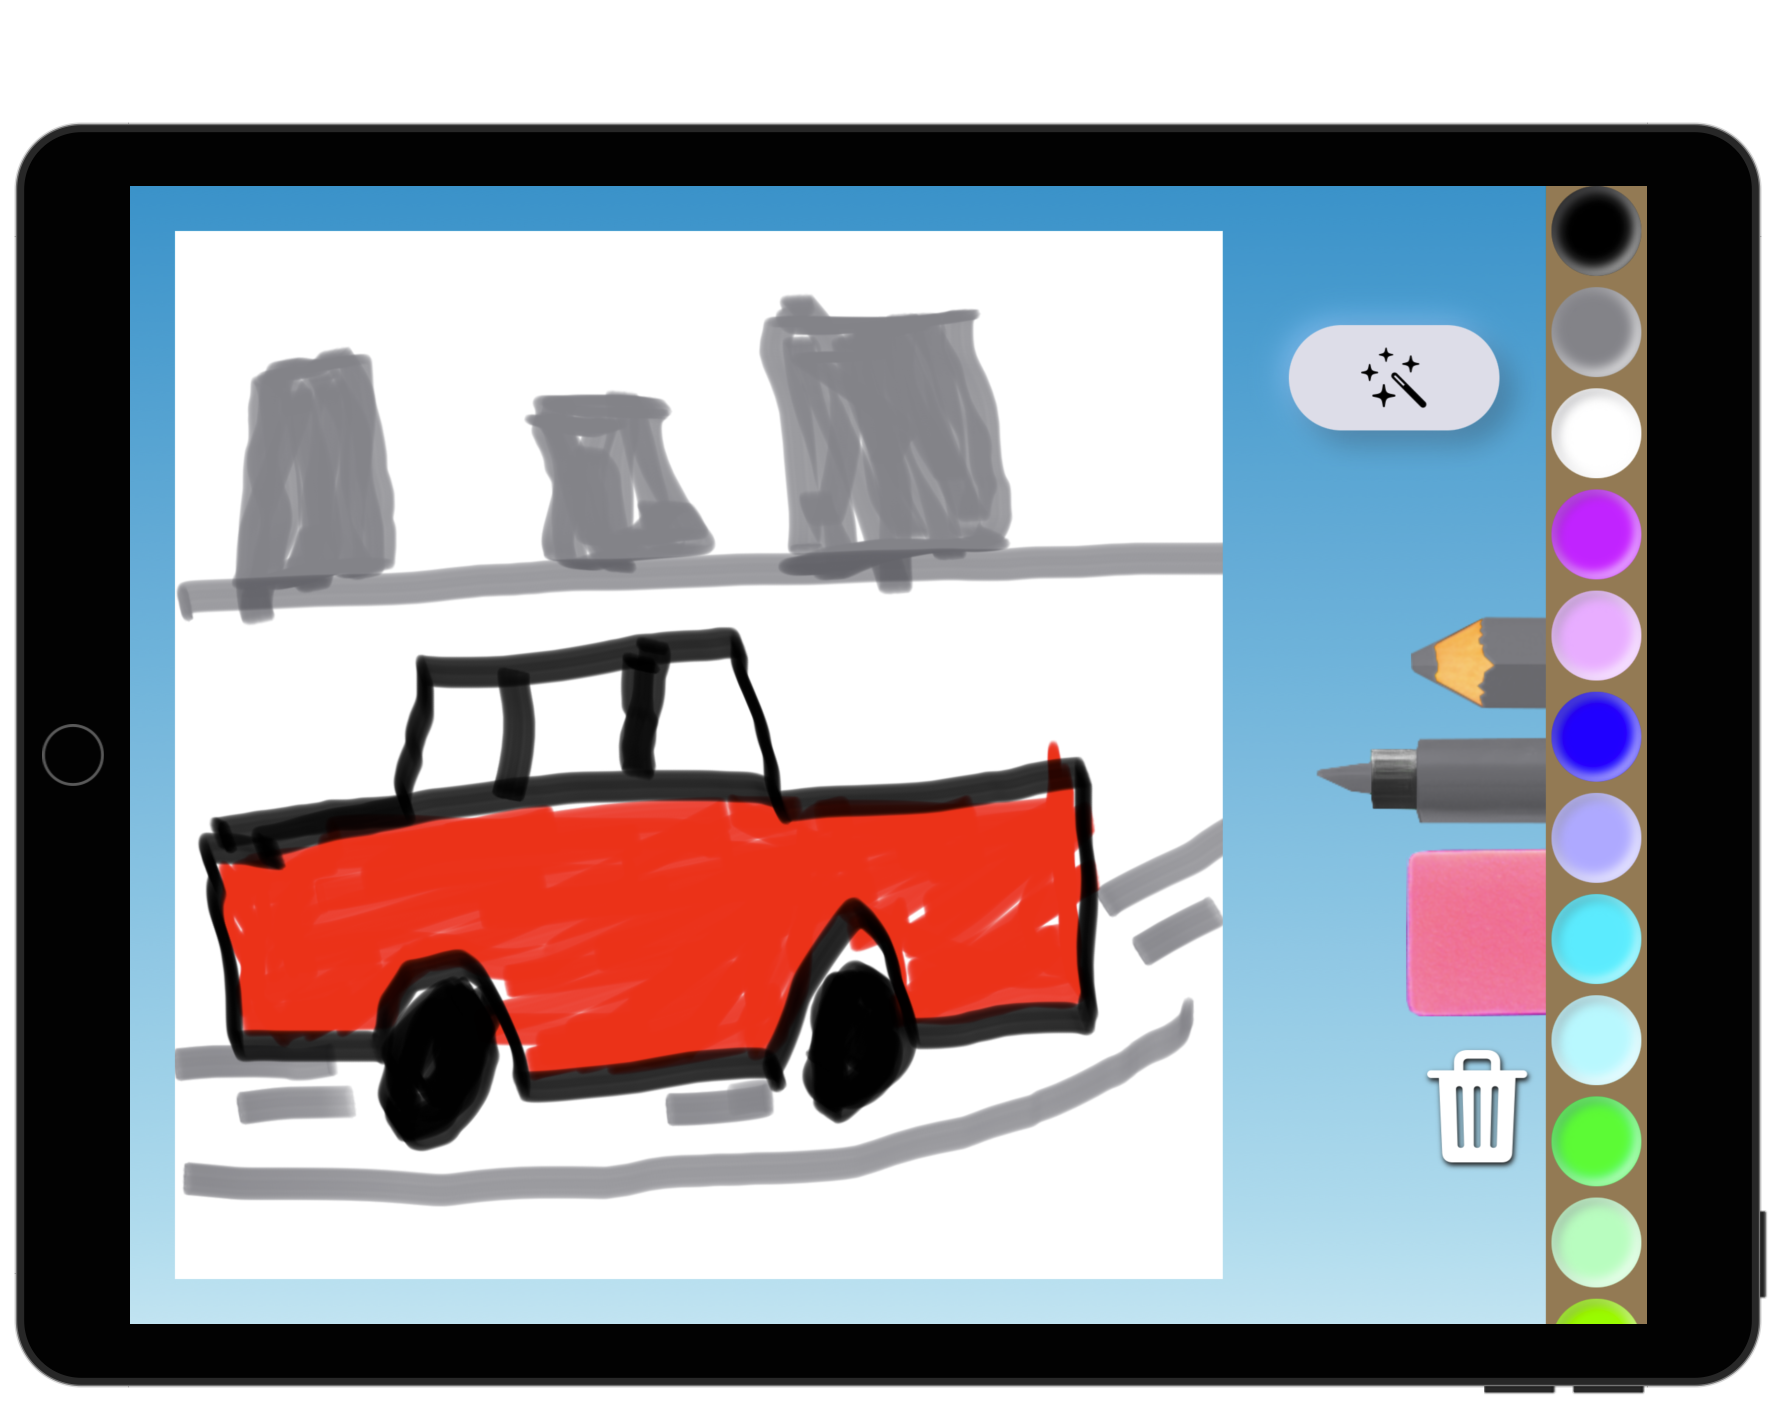 A simple drawing of a Car in Silly Times App